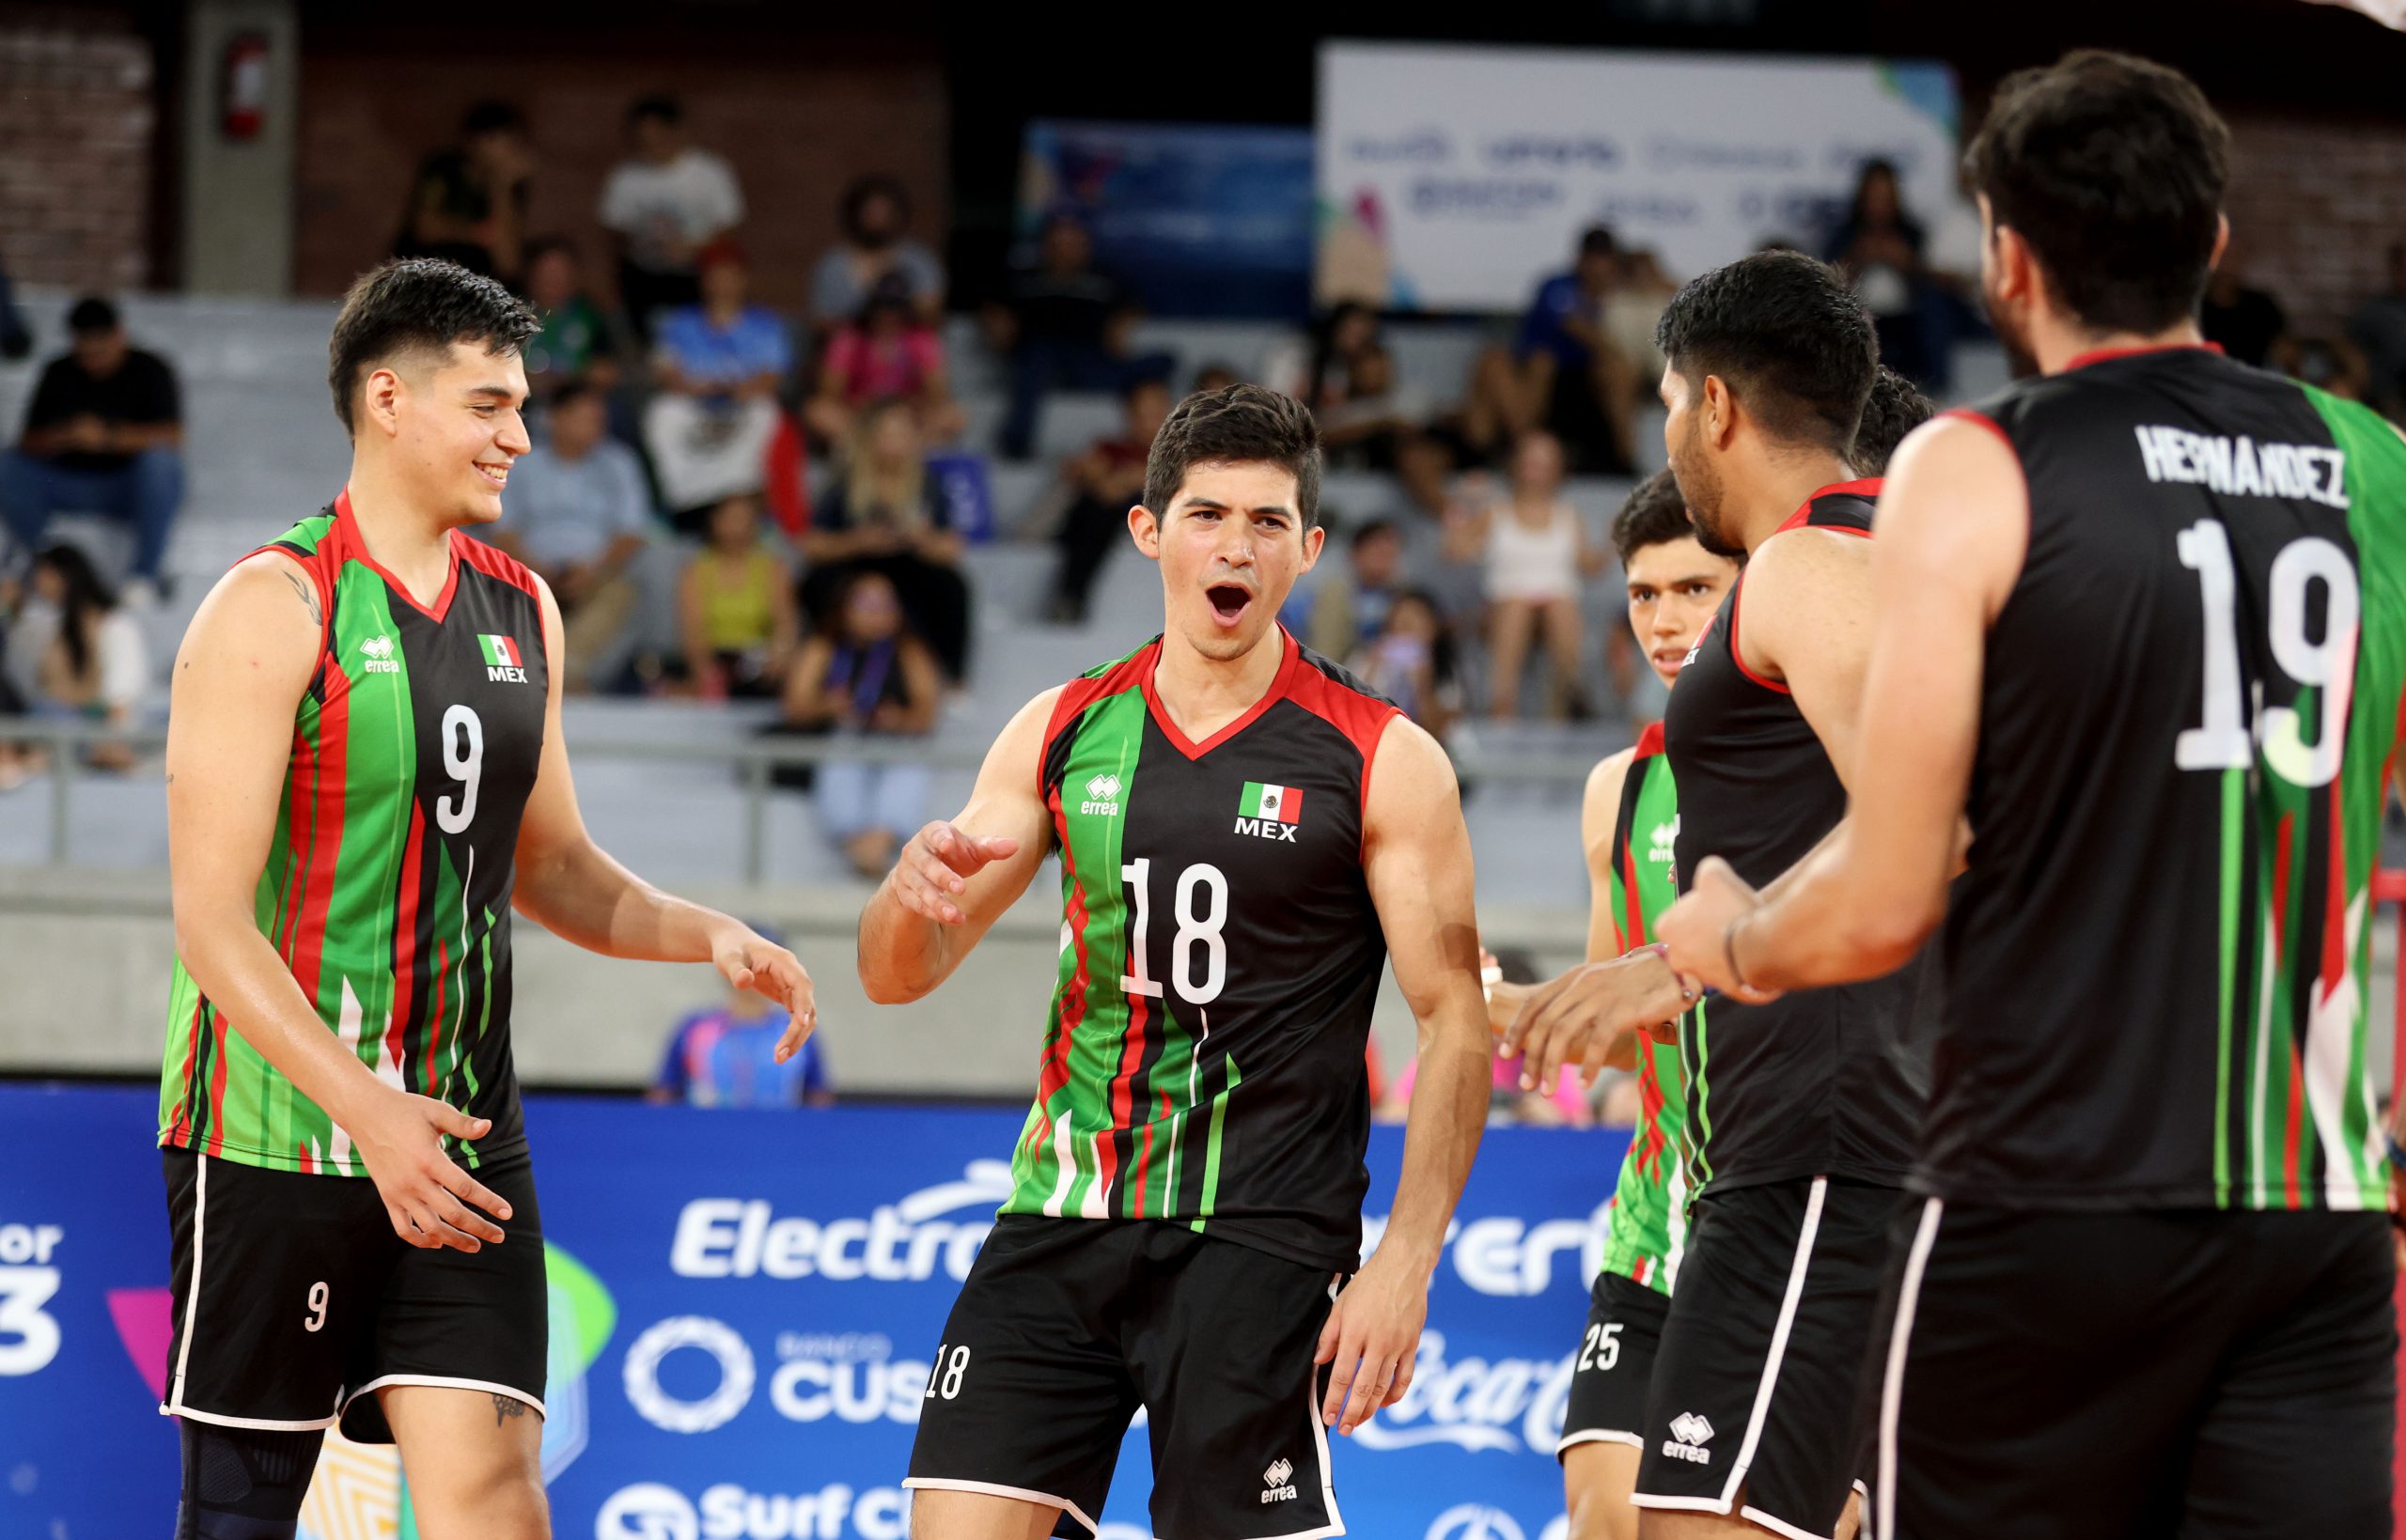 Mexico earns first victory at CAC Games defeating Suriname